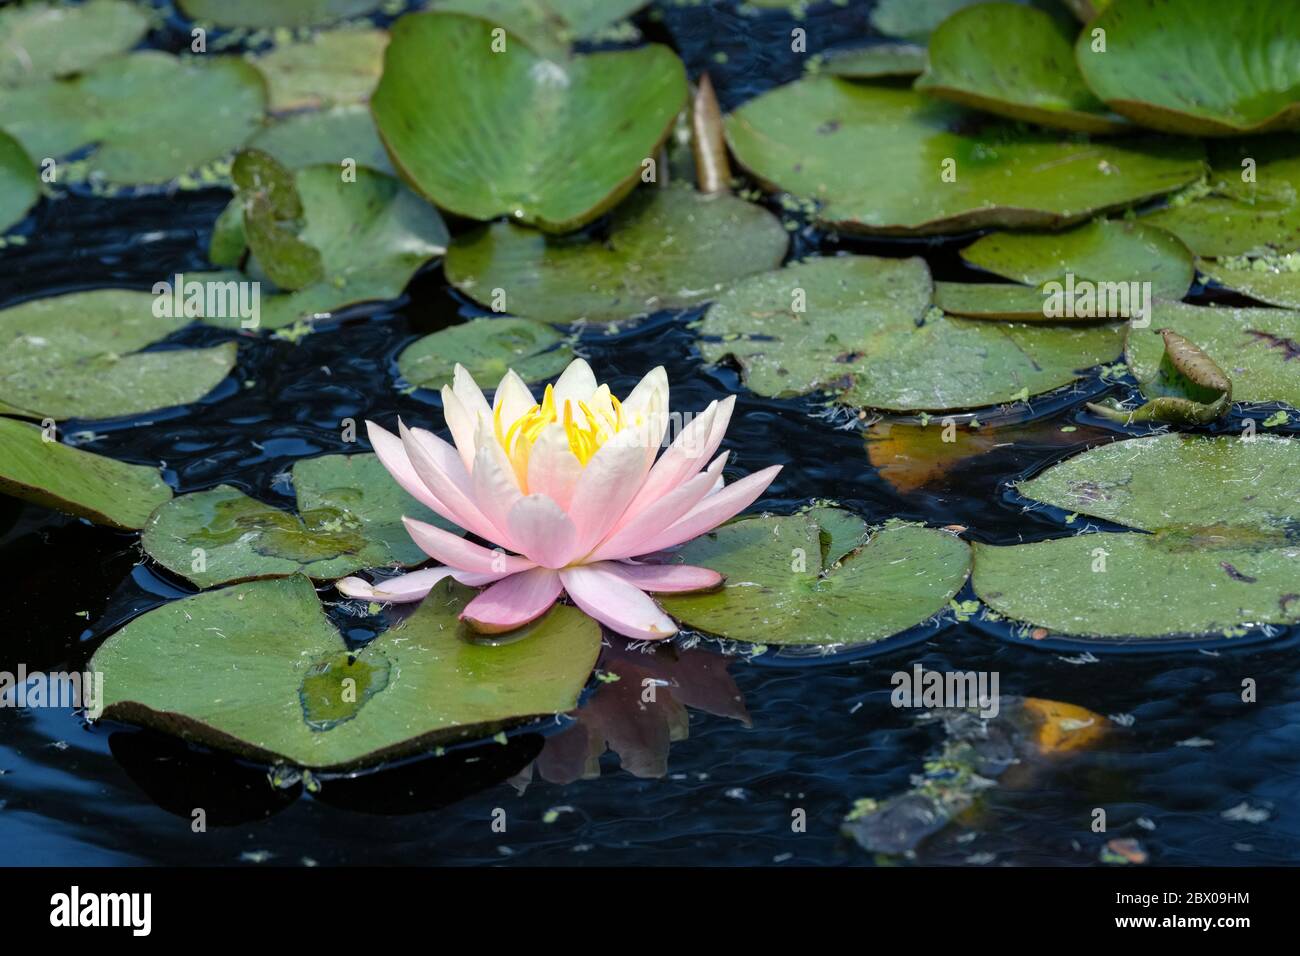 Single peach-coloured flower of Nymphaea Peace Lily, Waterlily growing in a pond, surrounded by lily pads Stock Photo